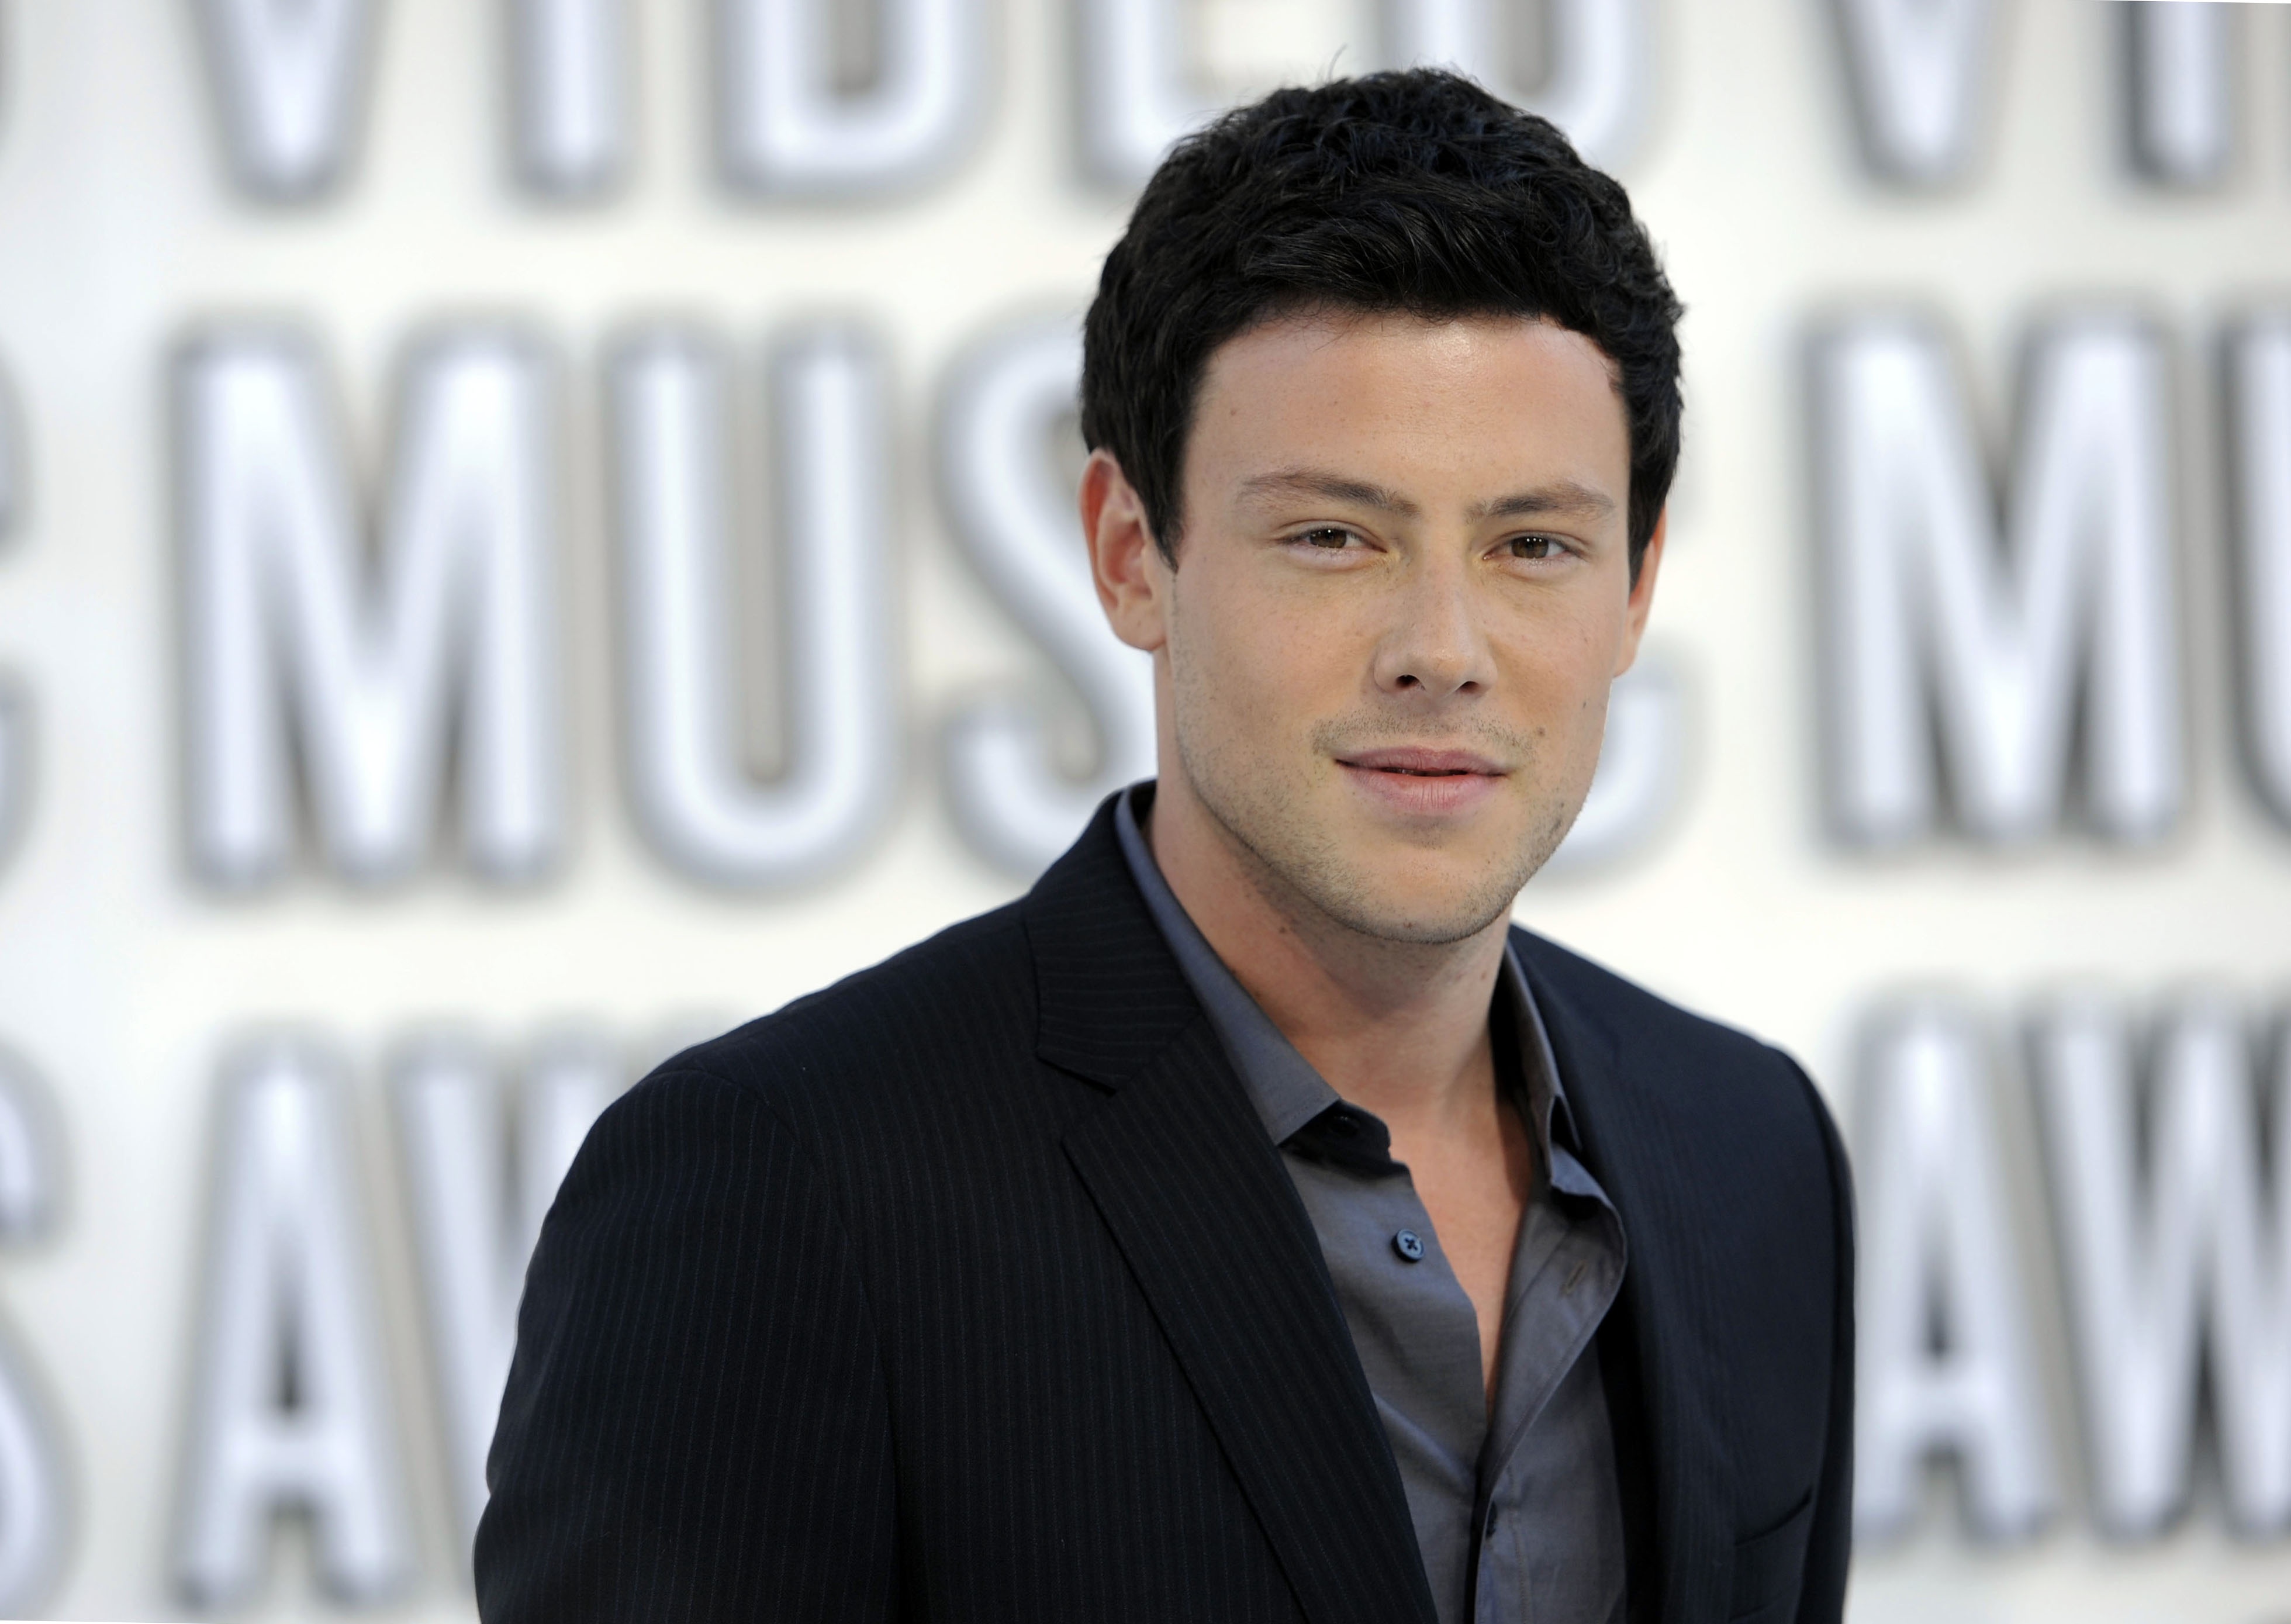 Top 10: Remembering Cory Monteith